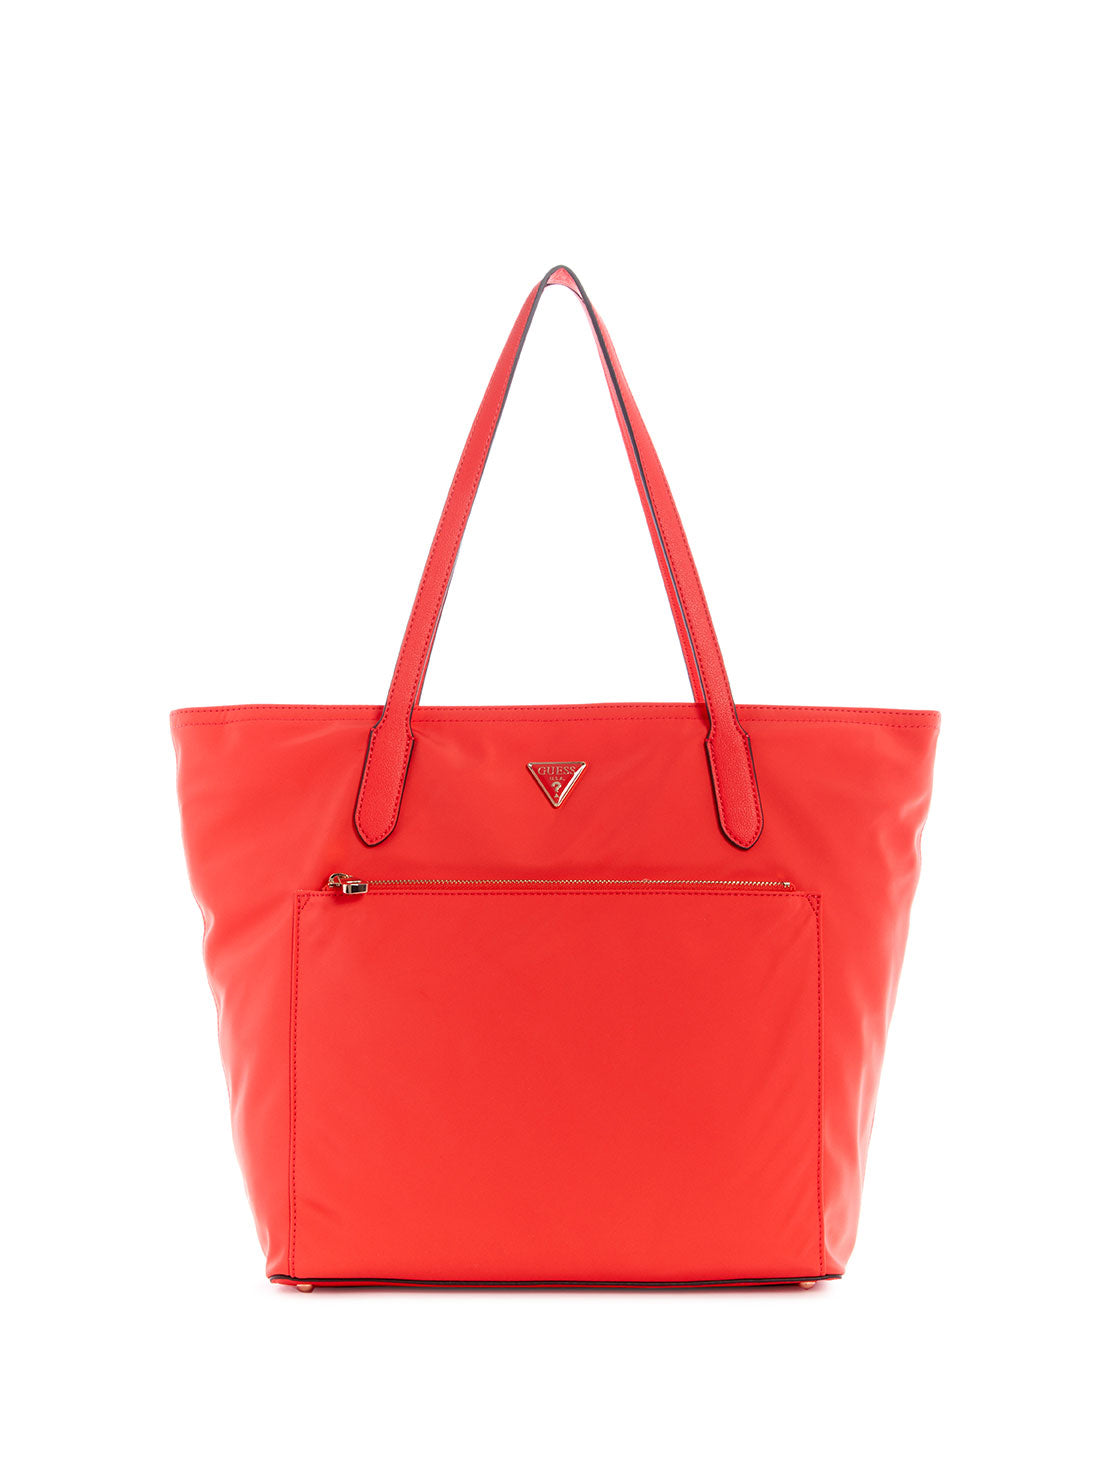 GUESS Women's Eco Red Gemma Tote Bag EYG839523 Front View